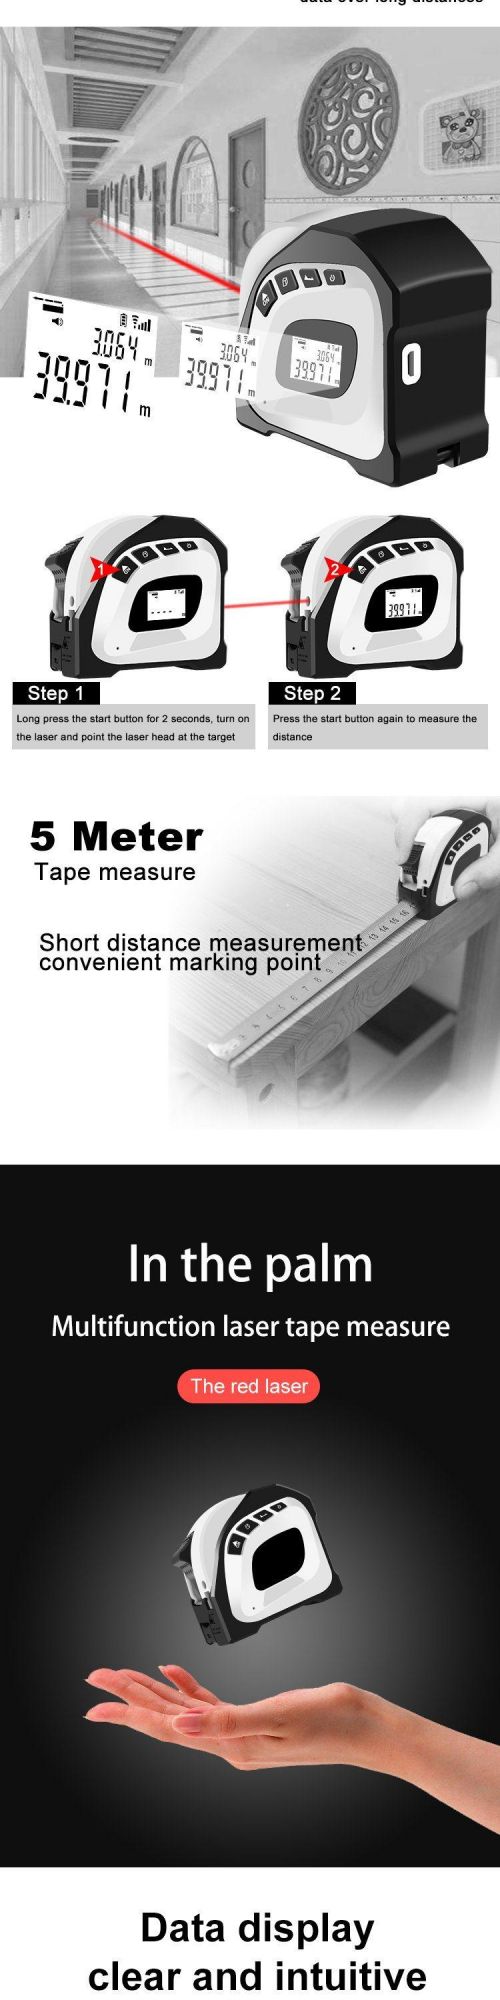 Brand Measuring Tape with 30m Laser Distance Meter